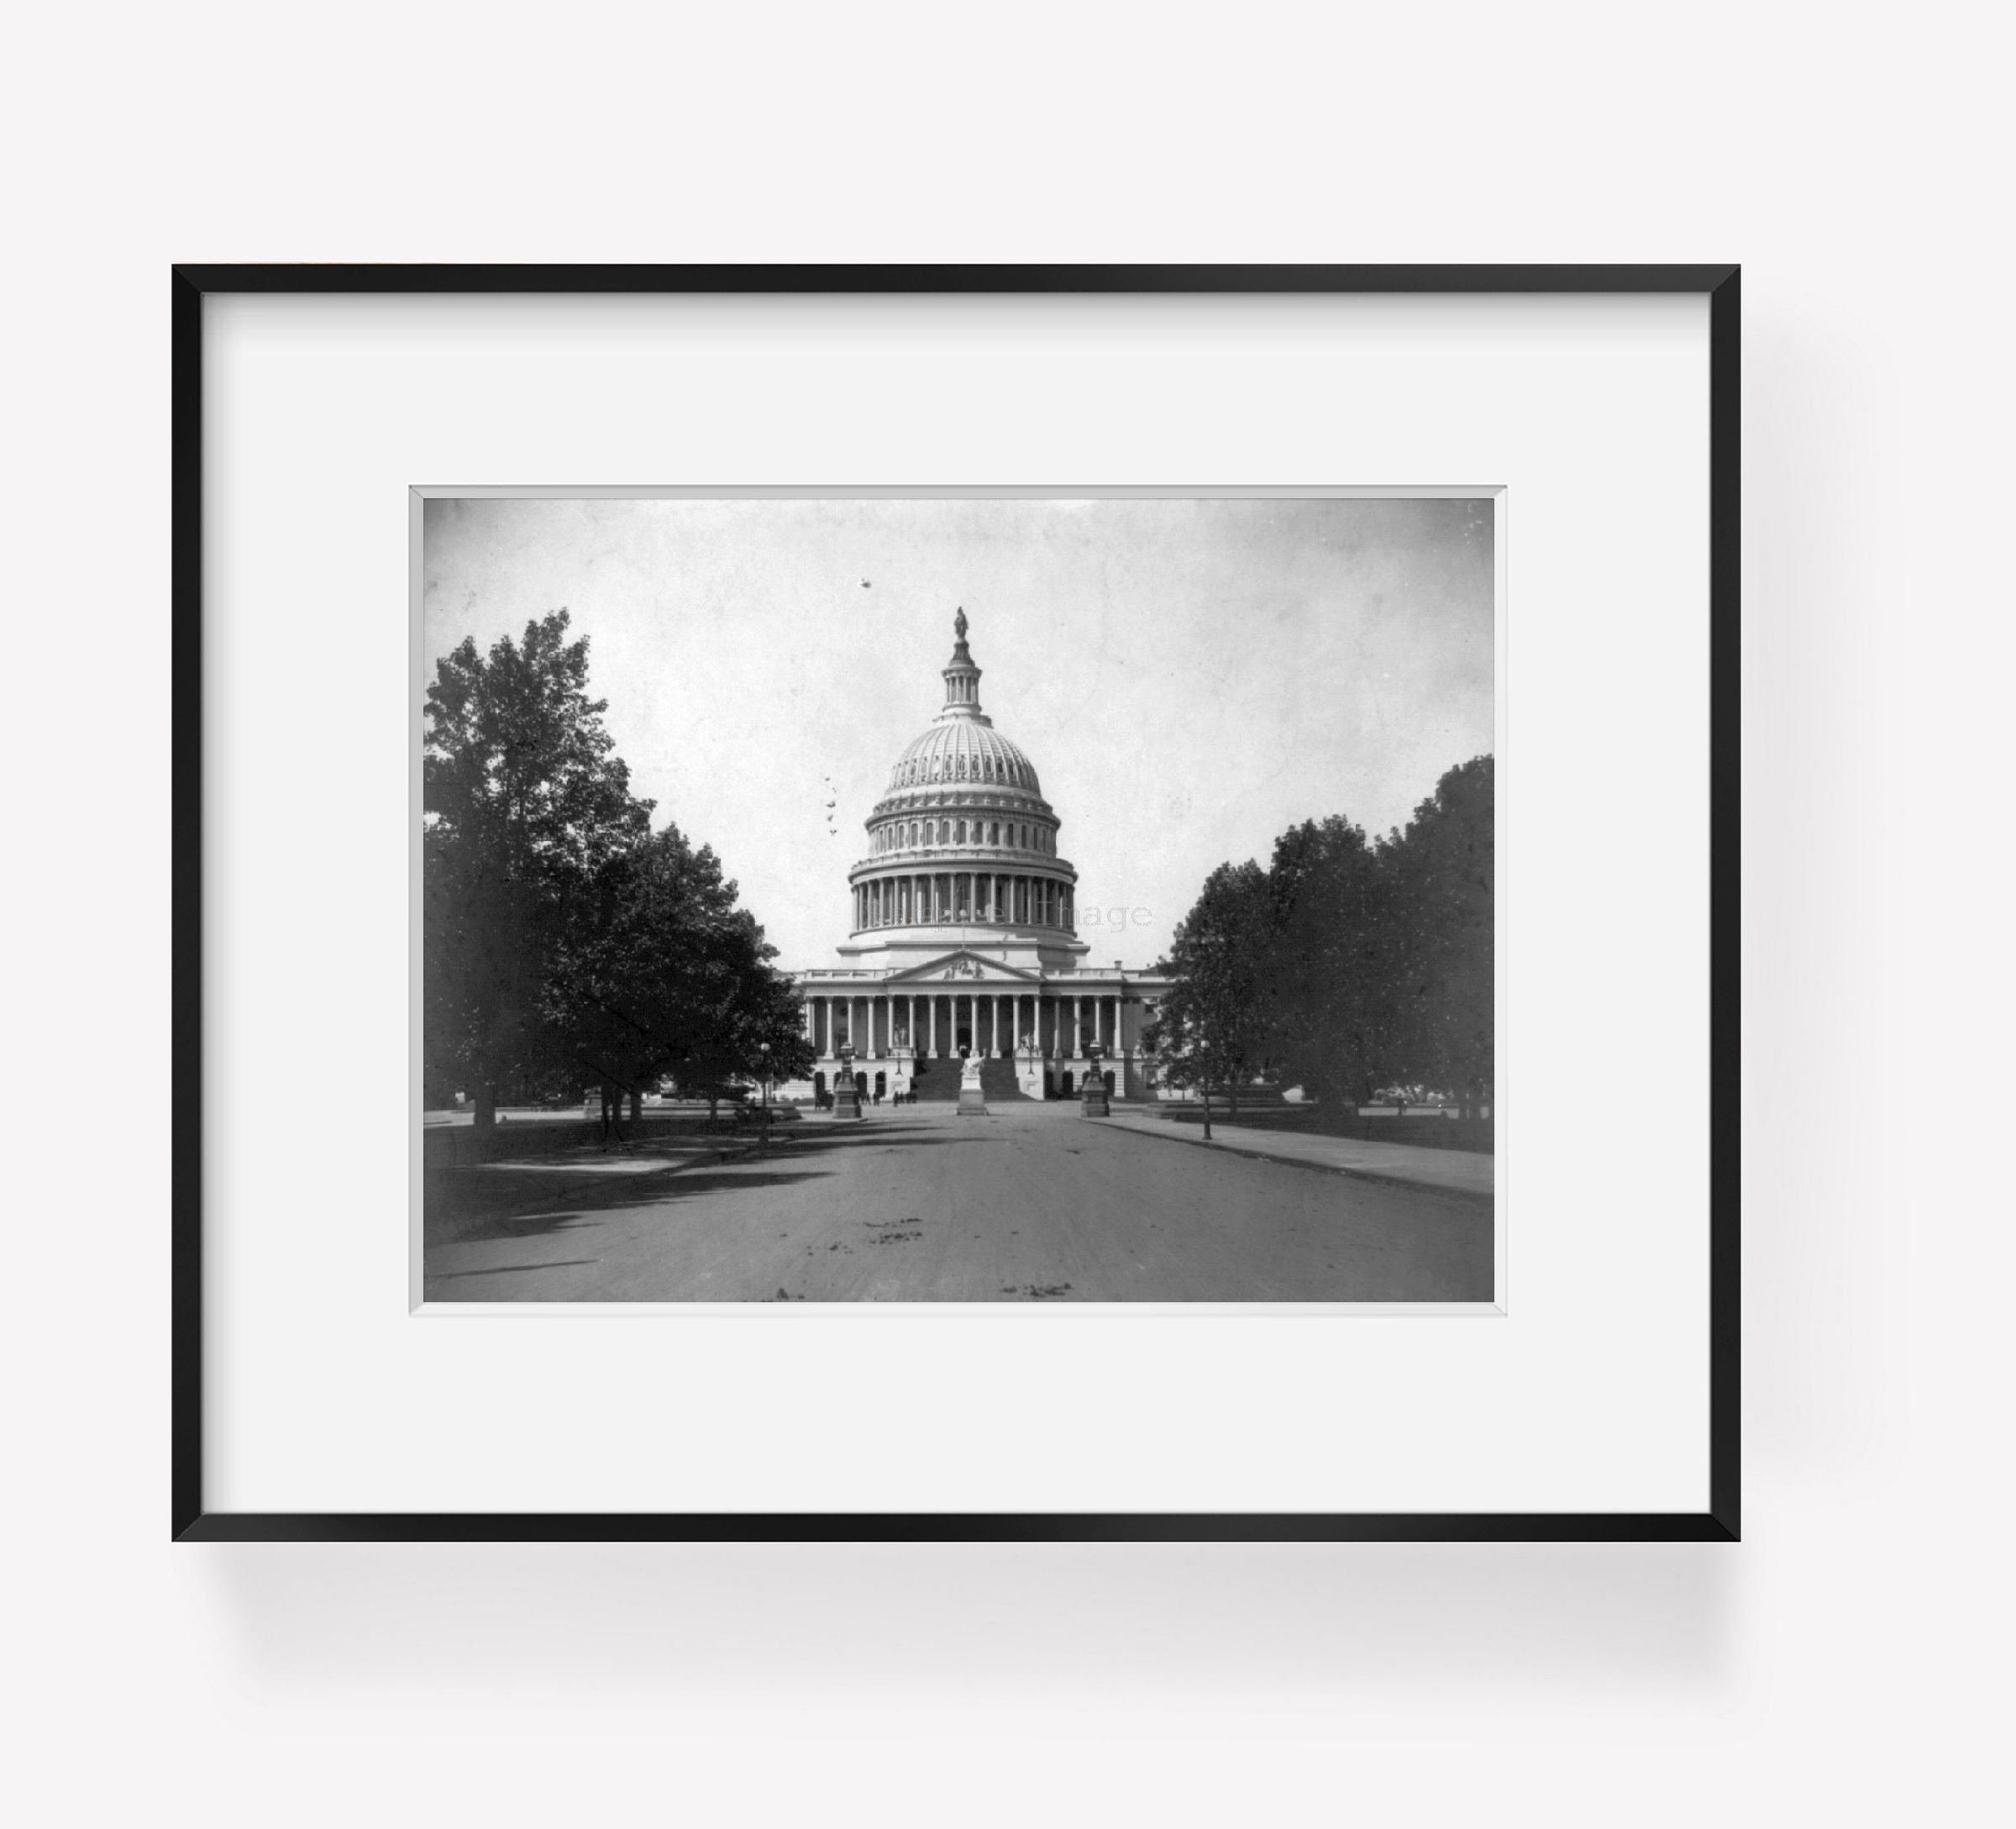 between 1880 and 1910 photograph of U.S. Capitol: East front (detail with dome)